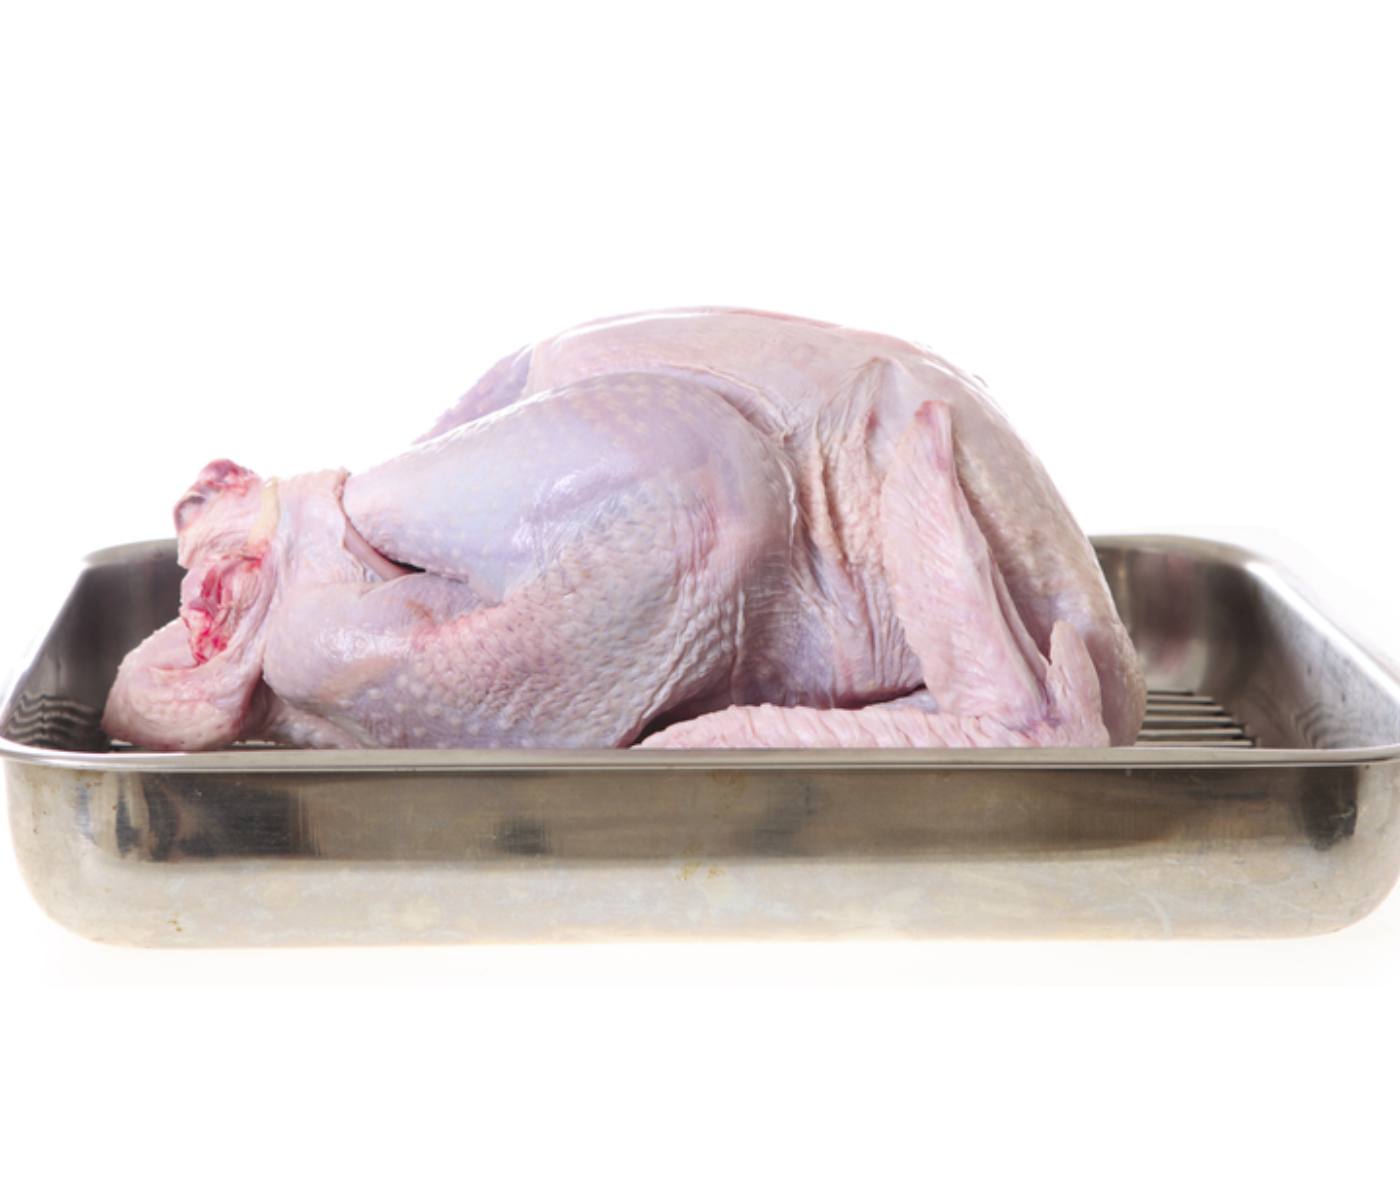 FSA advises about defrosted poultry products for Christmas time